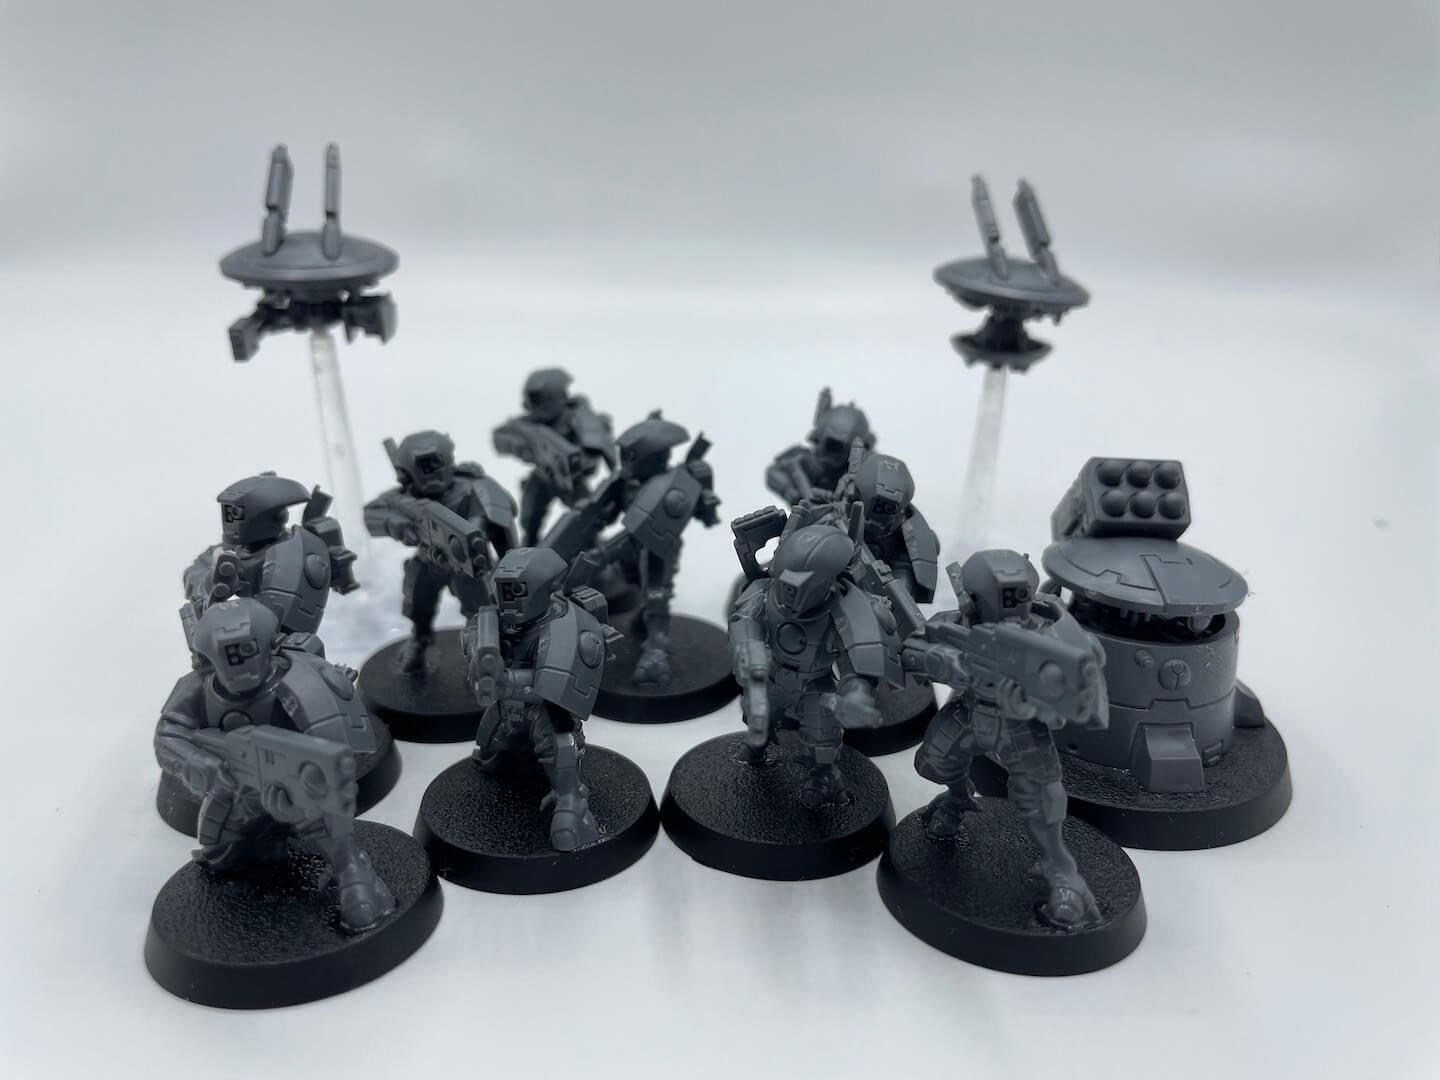 An image of the Warhammer 40K Boarding Patrol T'au Empire Strike Team, a group of blaster-wielding T'au ready to take on the enemy.